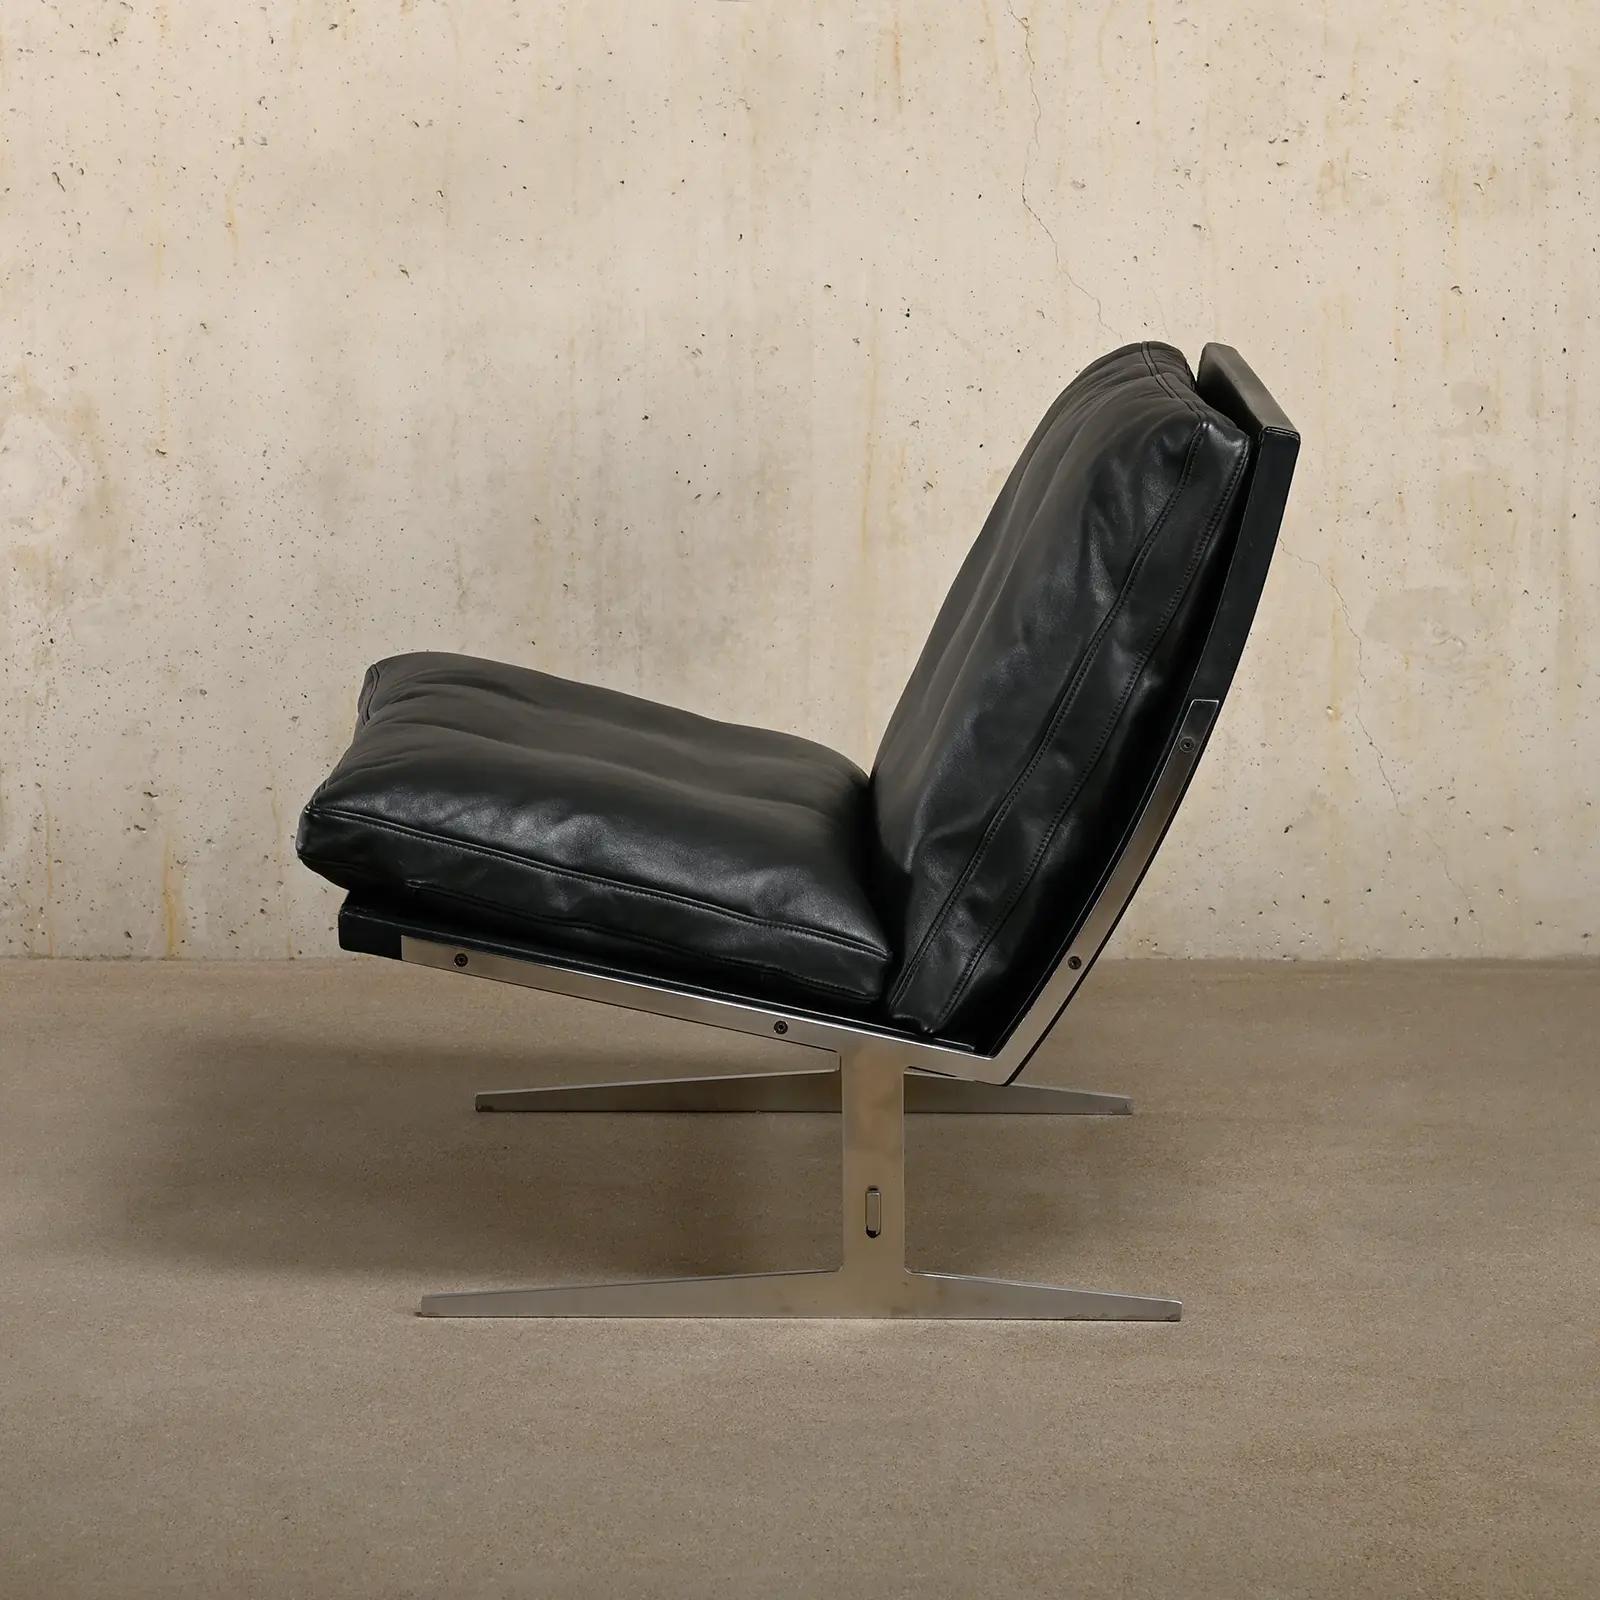 Beautiful lounge chair designed by Jørgen Kastholm & Preben Fabricius model Bo-561 and produced by Bo-Ex in Denmark. Chrome plated steel frame with seat and back panel upholstered in black leather. The cushions are also upholstered in soft black